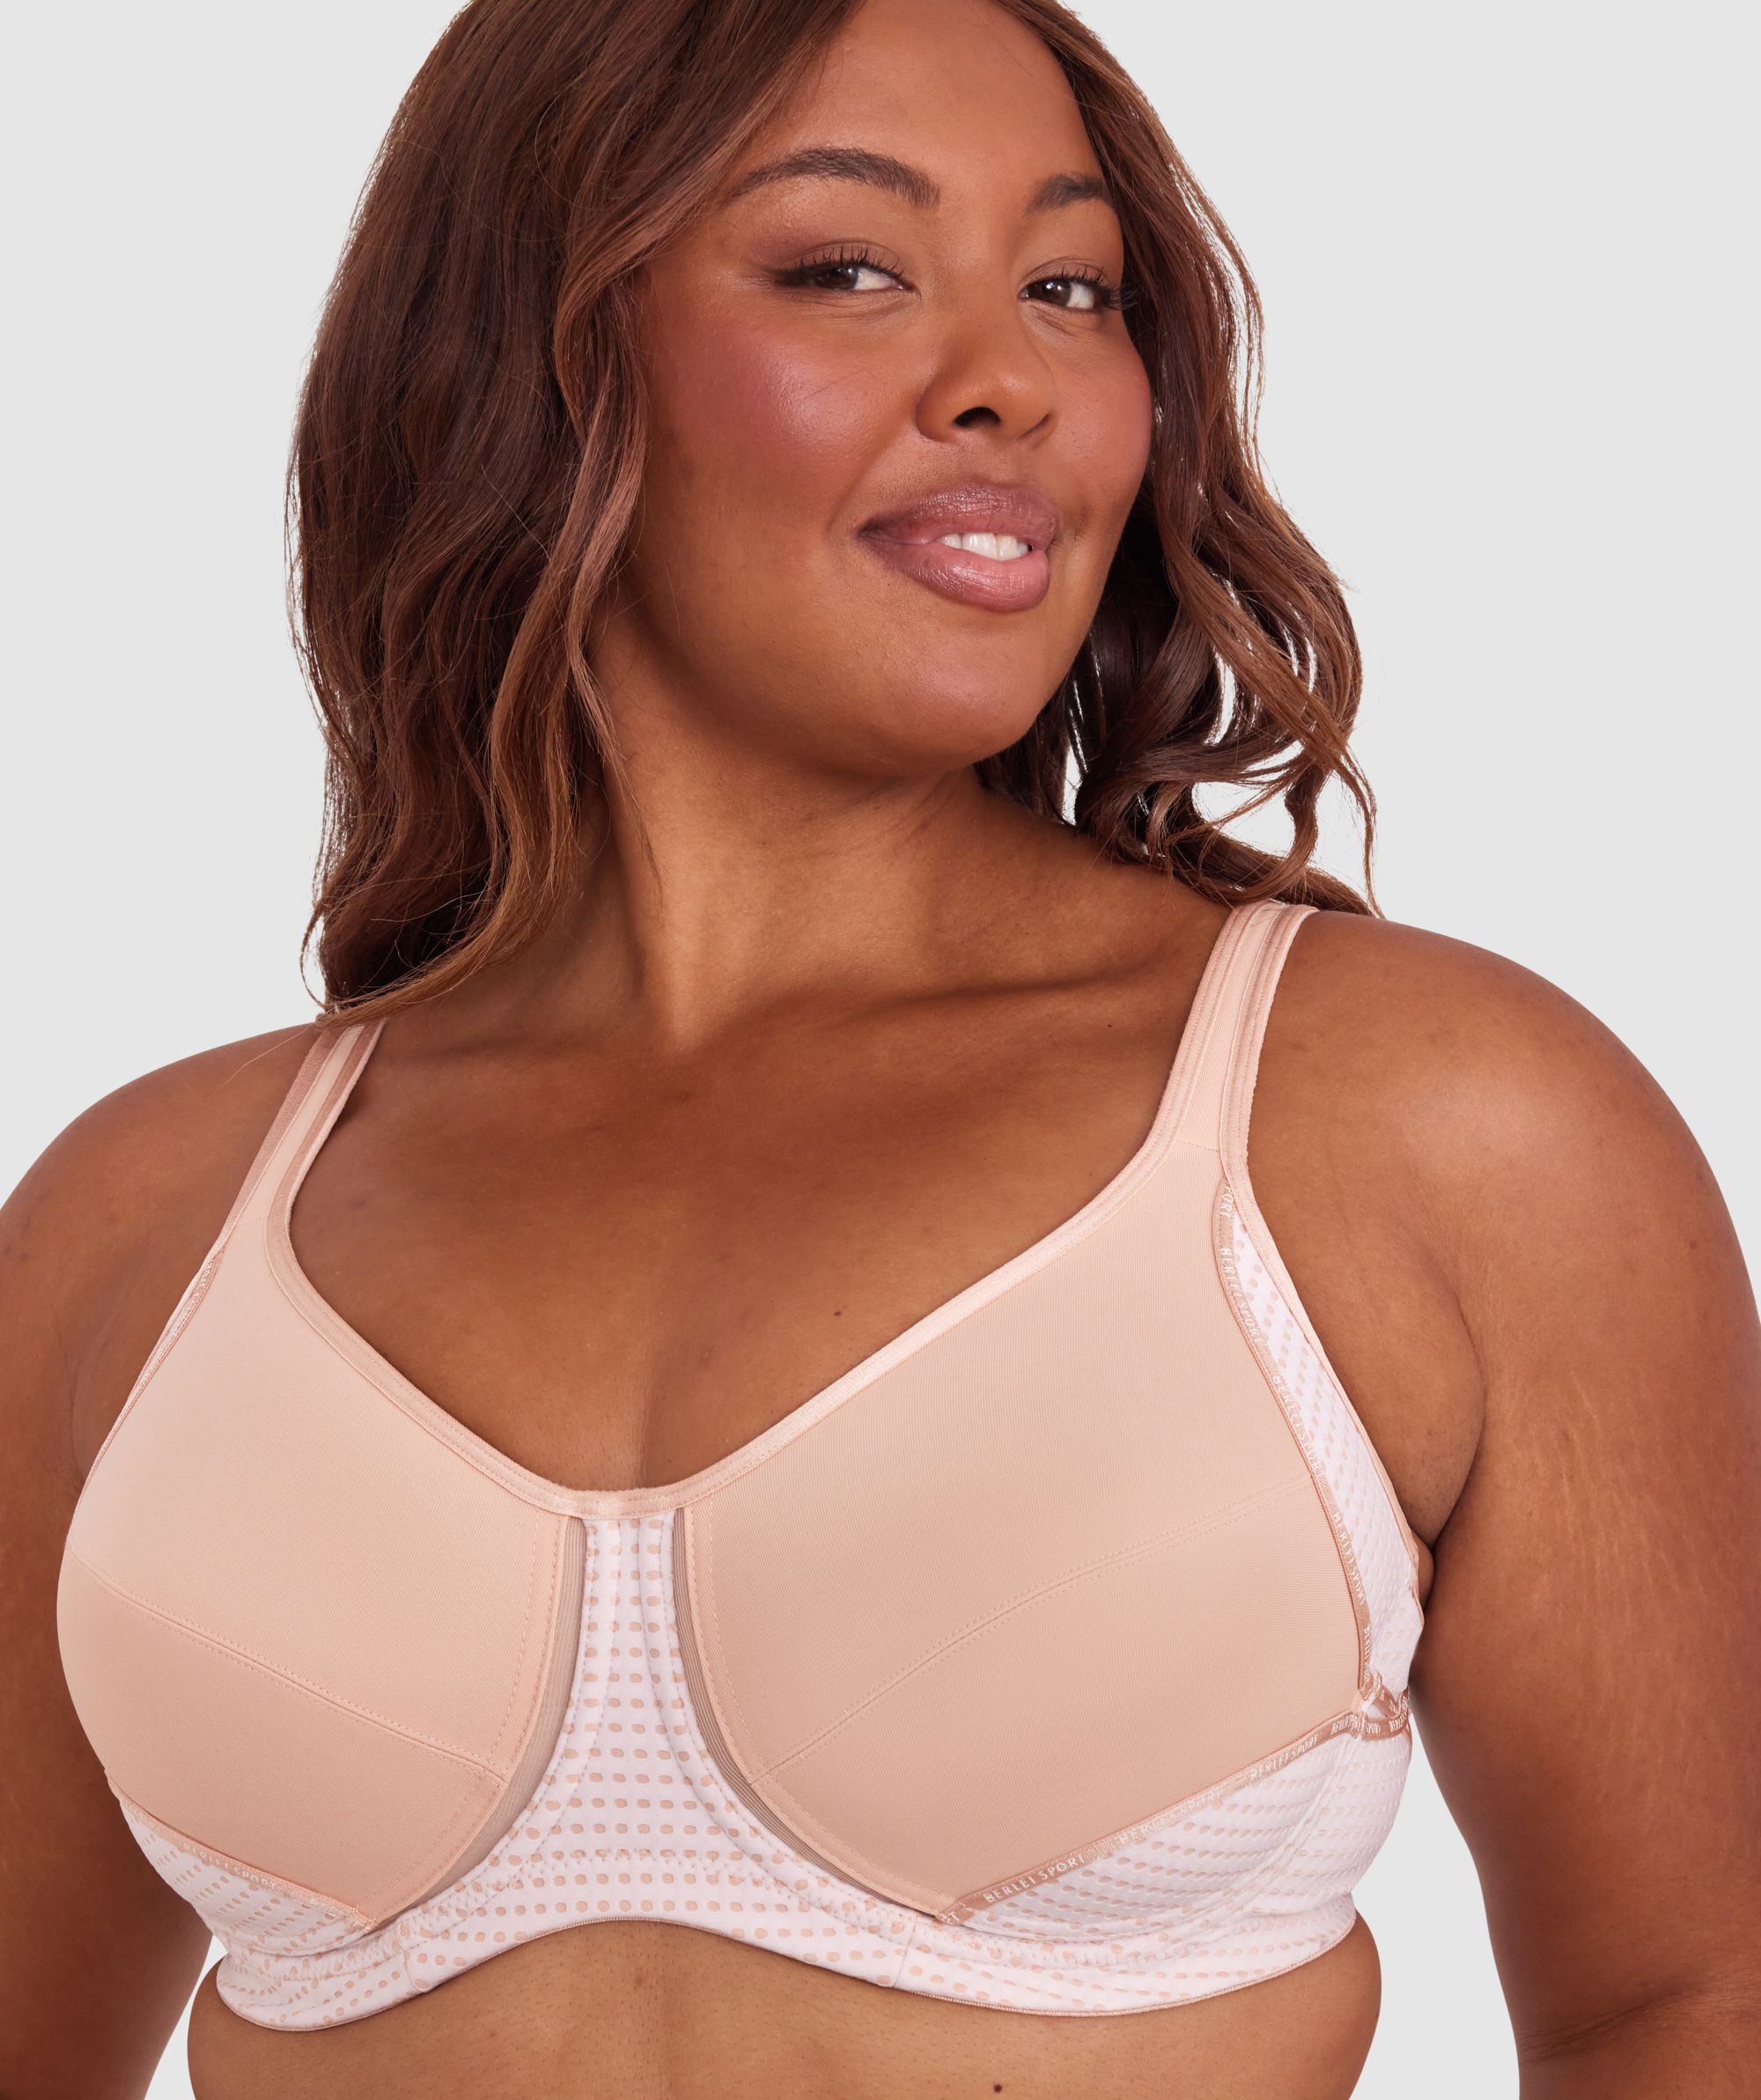 True & Co. Bra Review: Why One Glamour Writer Swear by This Basic Bra